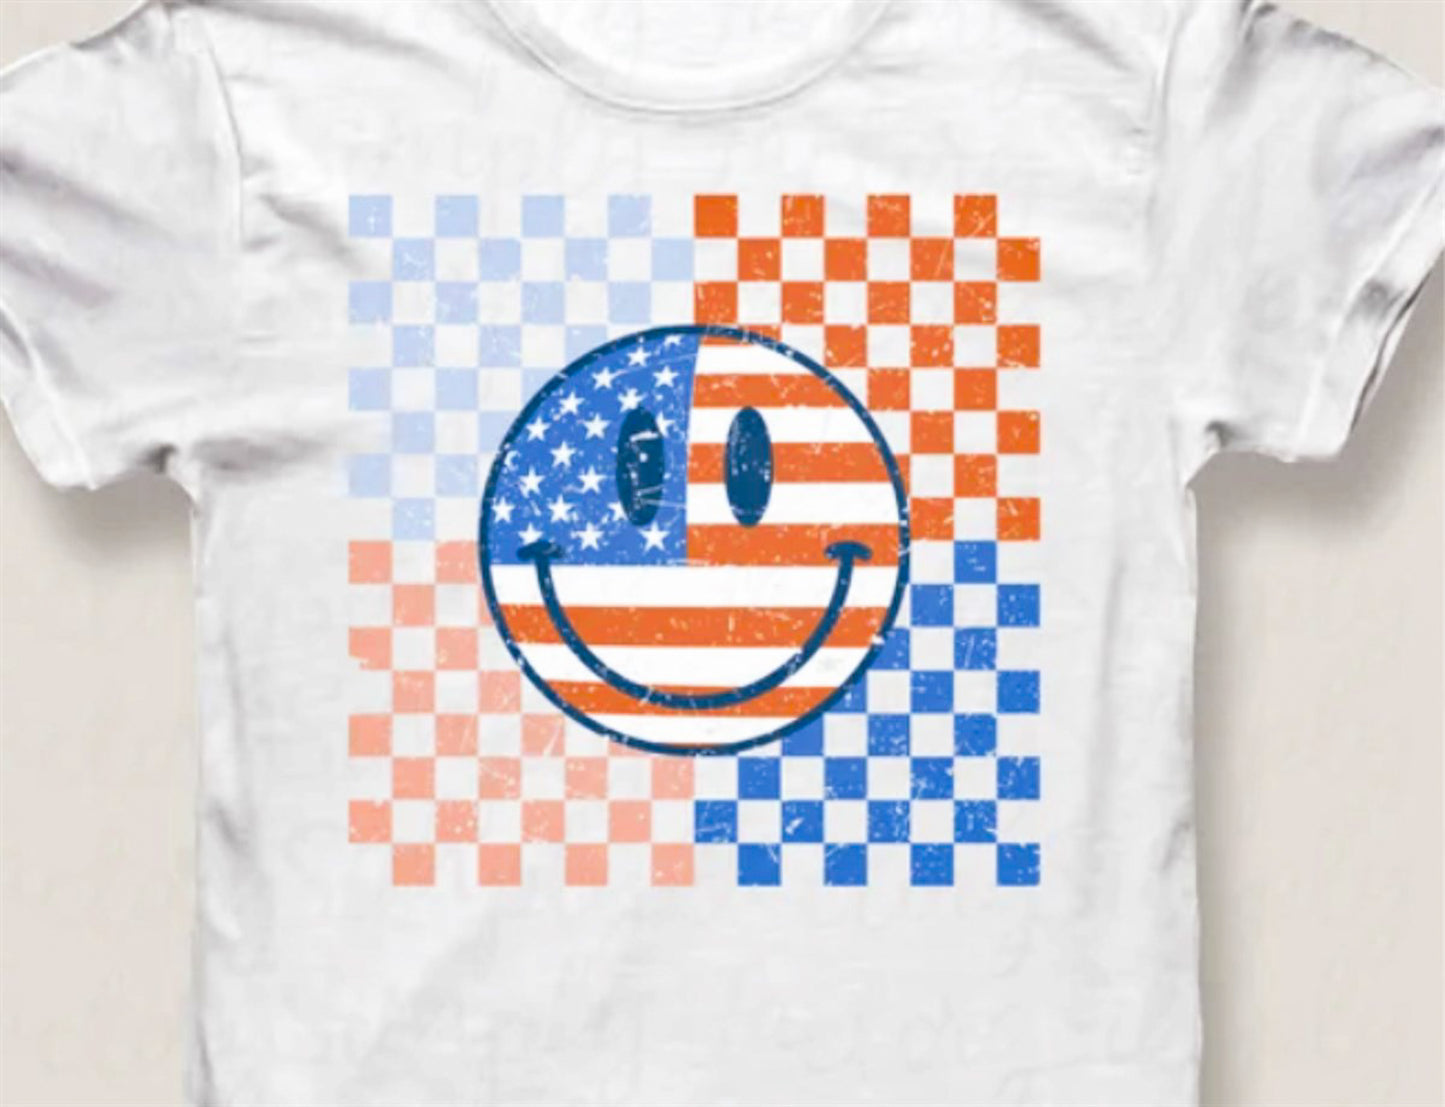 Patriotic Smiley With Red & Blue Checkered Tee